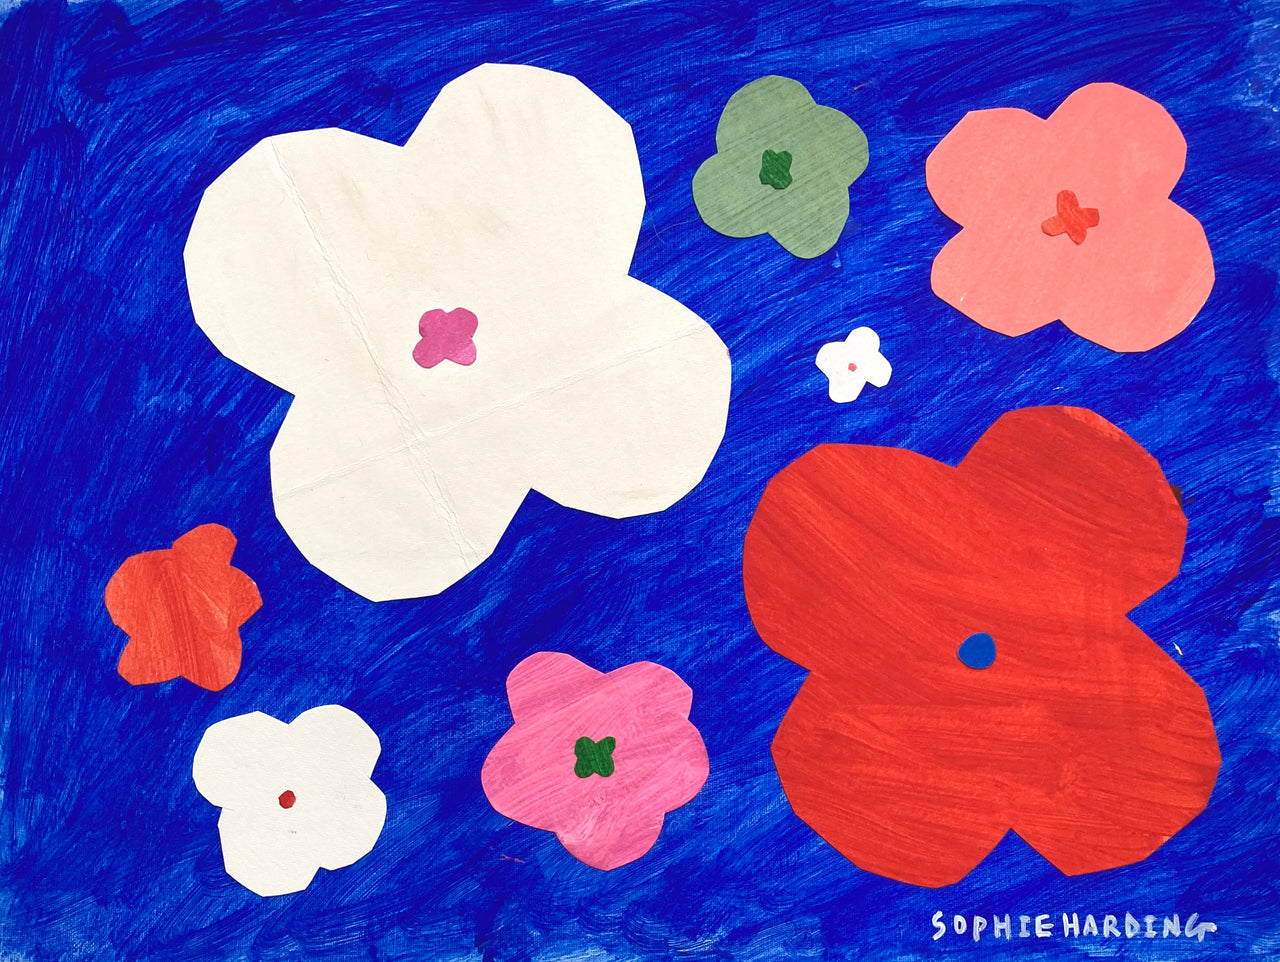 Cornish artist Sophie Harding, white, pink red and green flowers on blue background